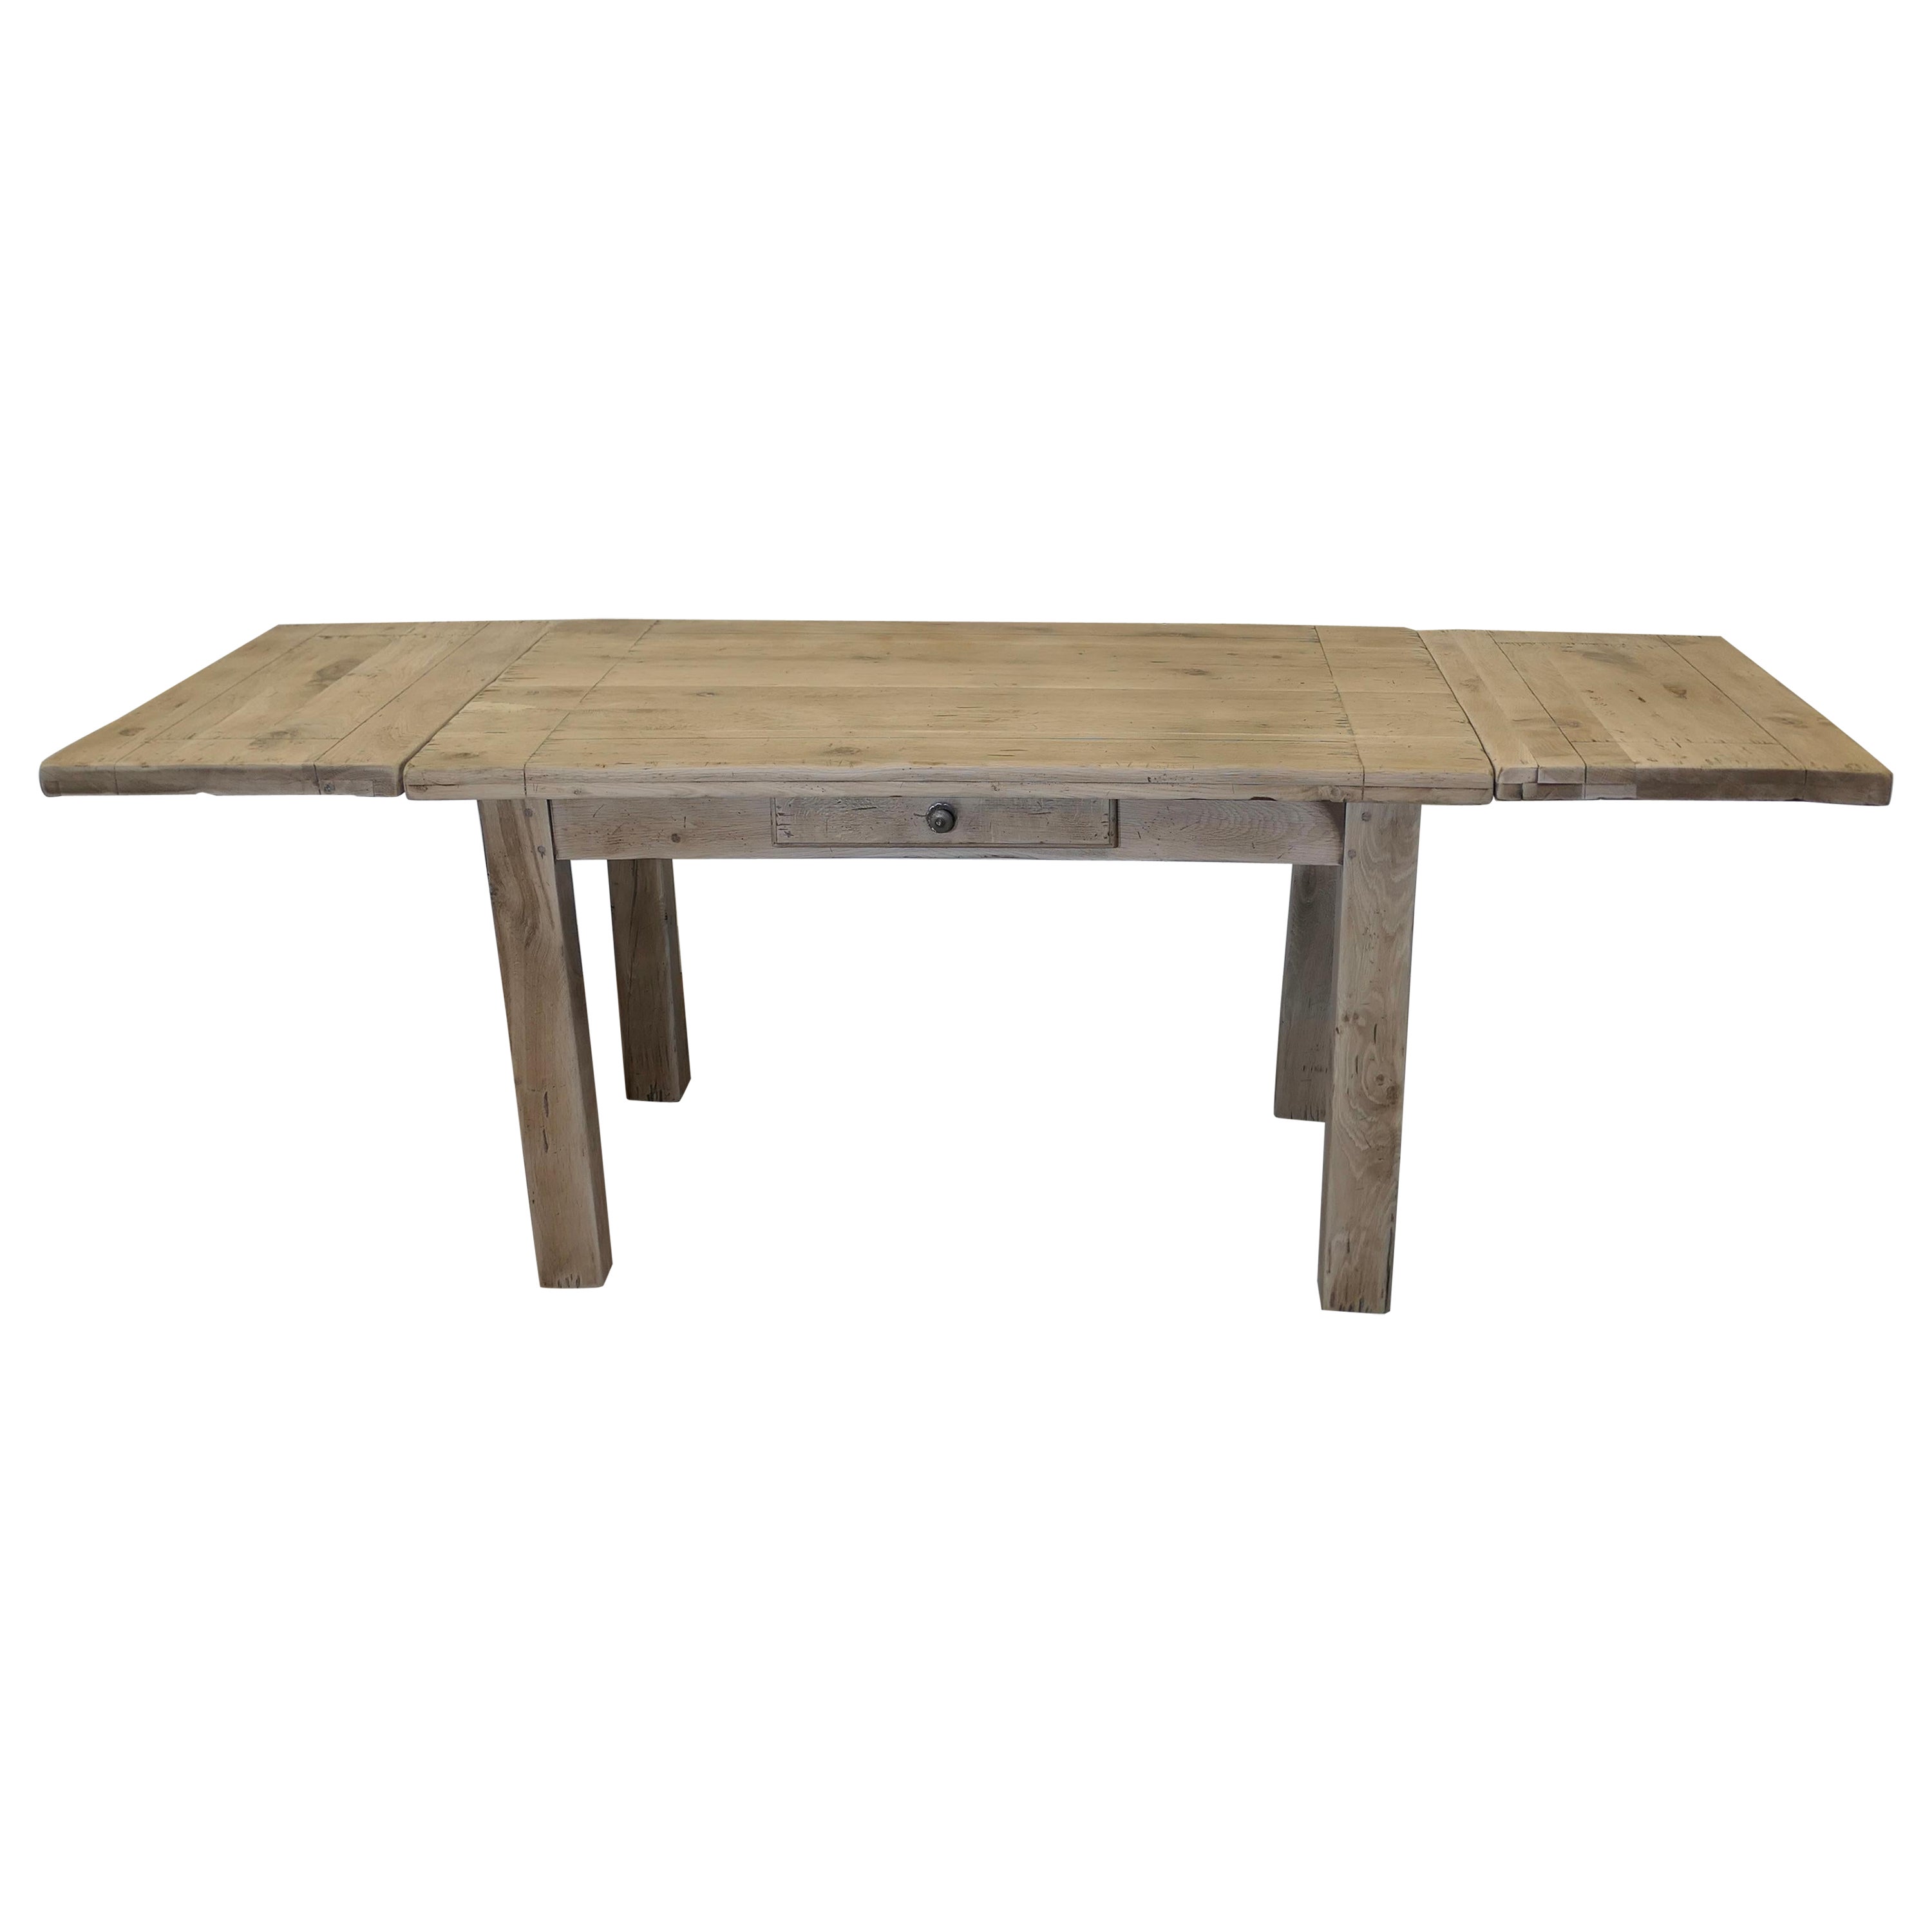 Sun Bleached Oak 7ft Extending Dining Table  The table is very heavy an solid  For Sale